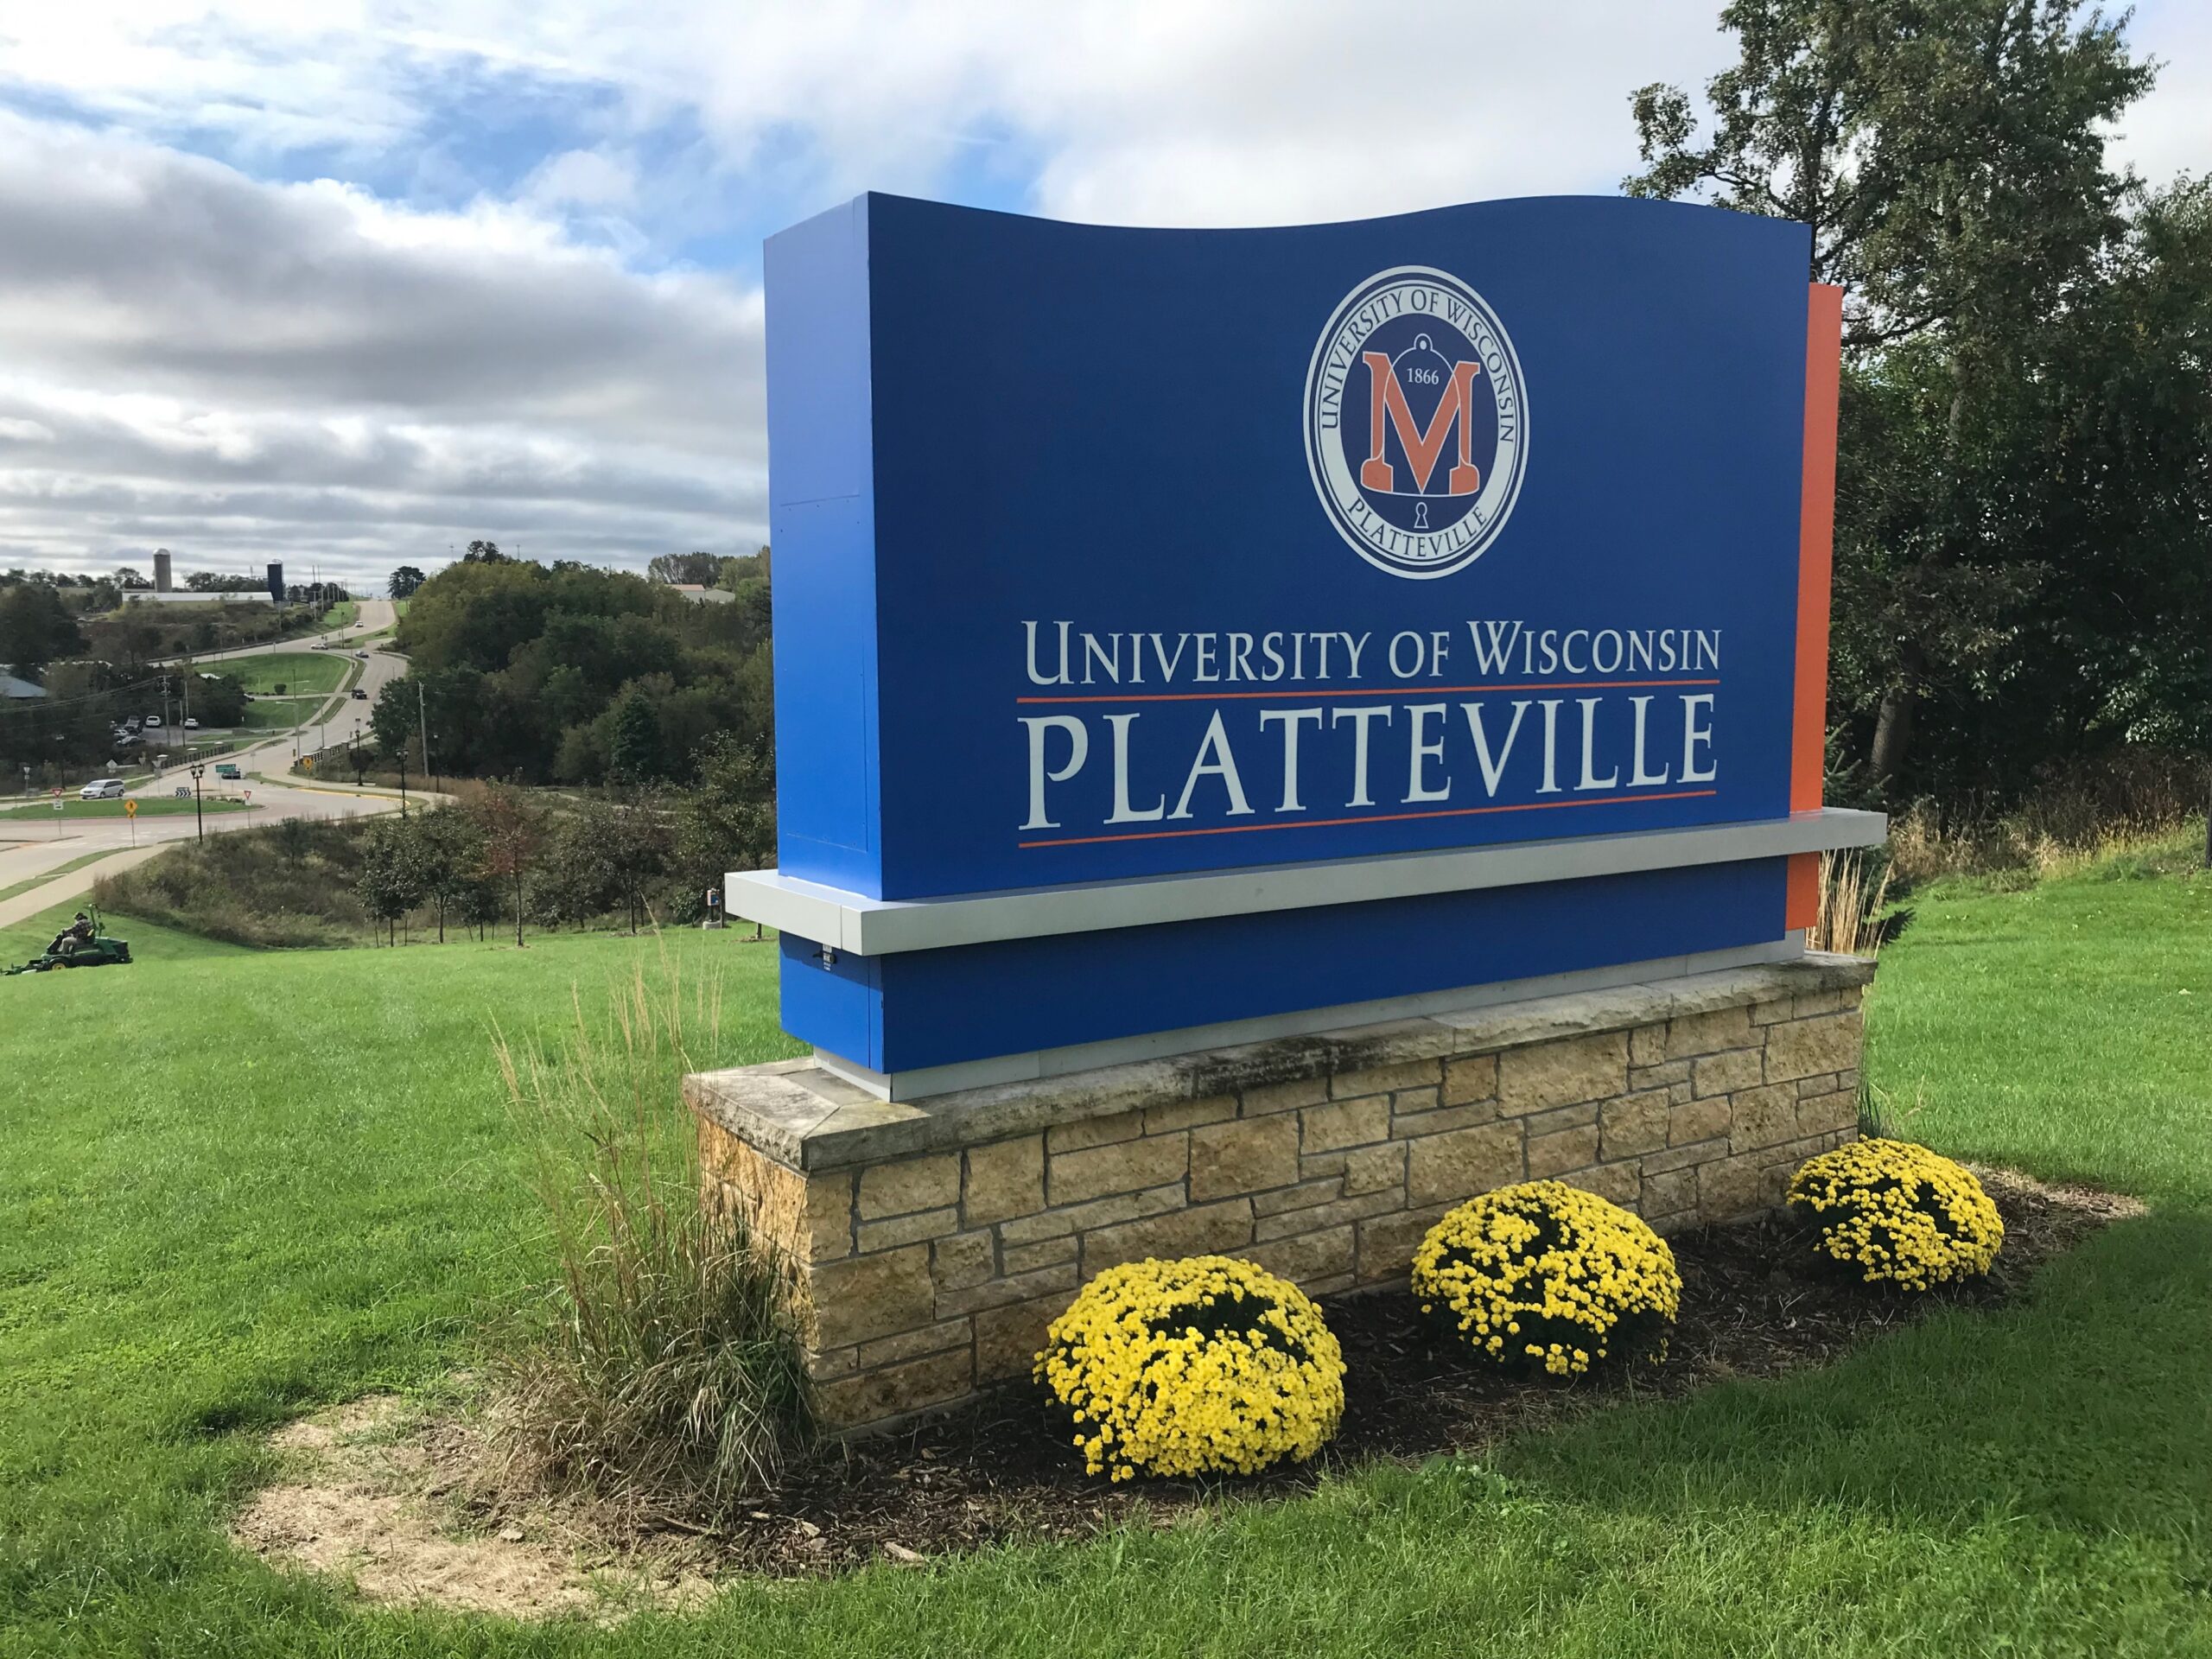 A blue sign reading "University of Wisconsin-Platteville" stands on the schools' campus.